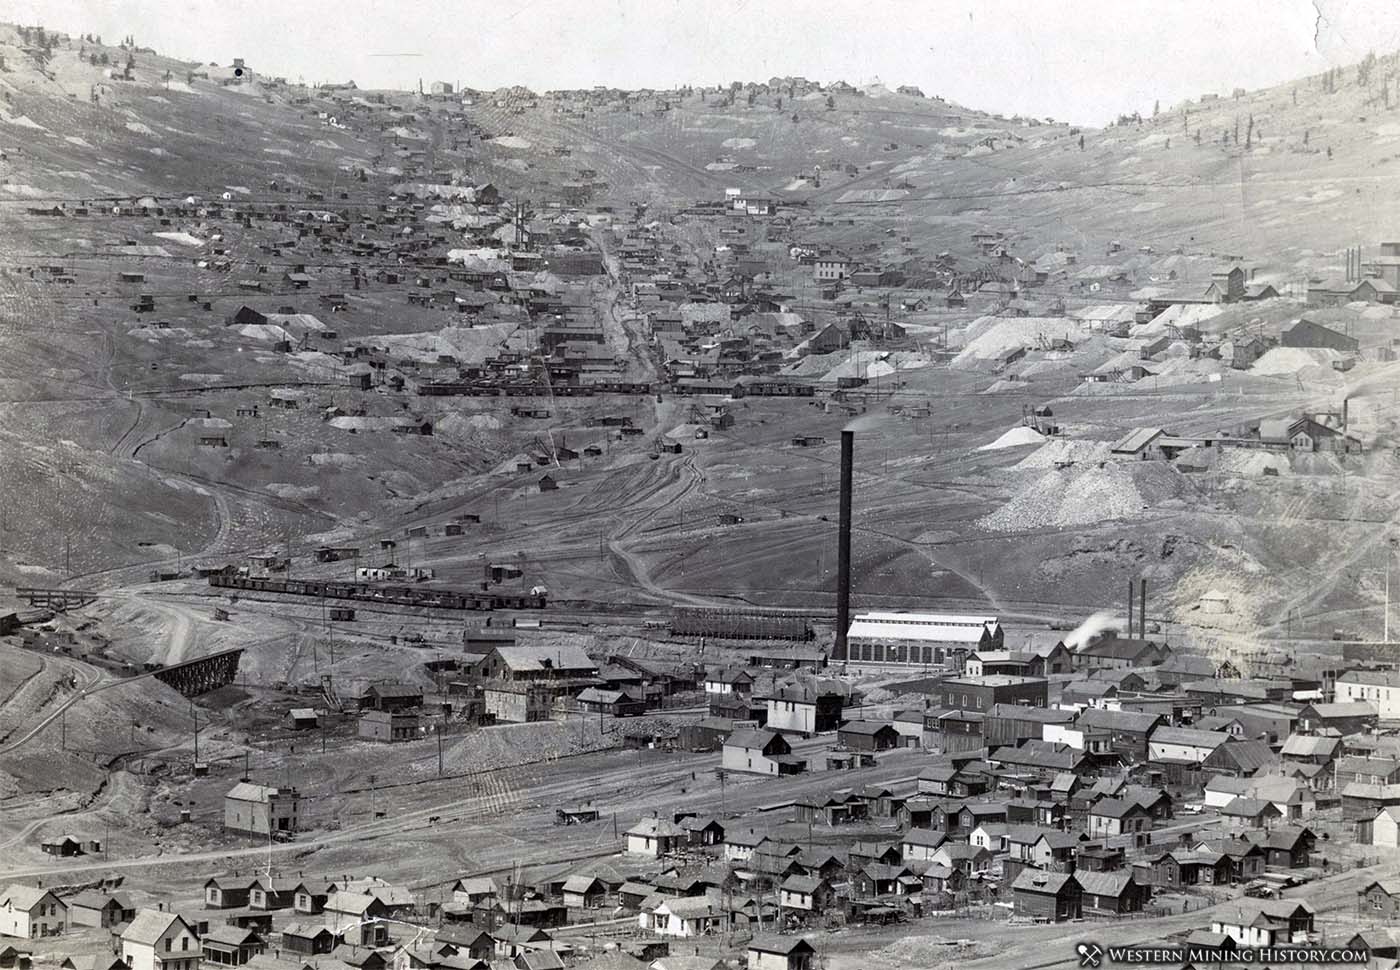 View of Goldfield (bottom), Independence (center), and Altman (top)